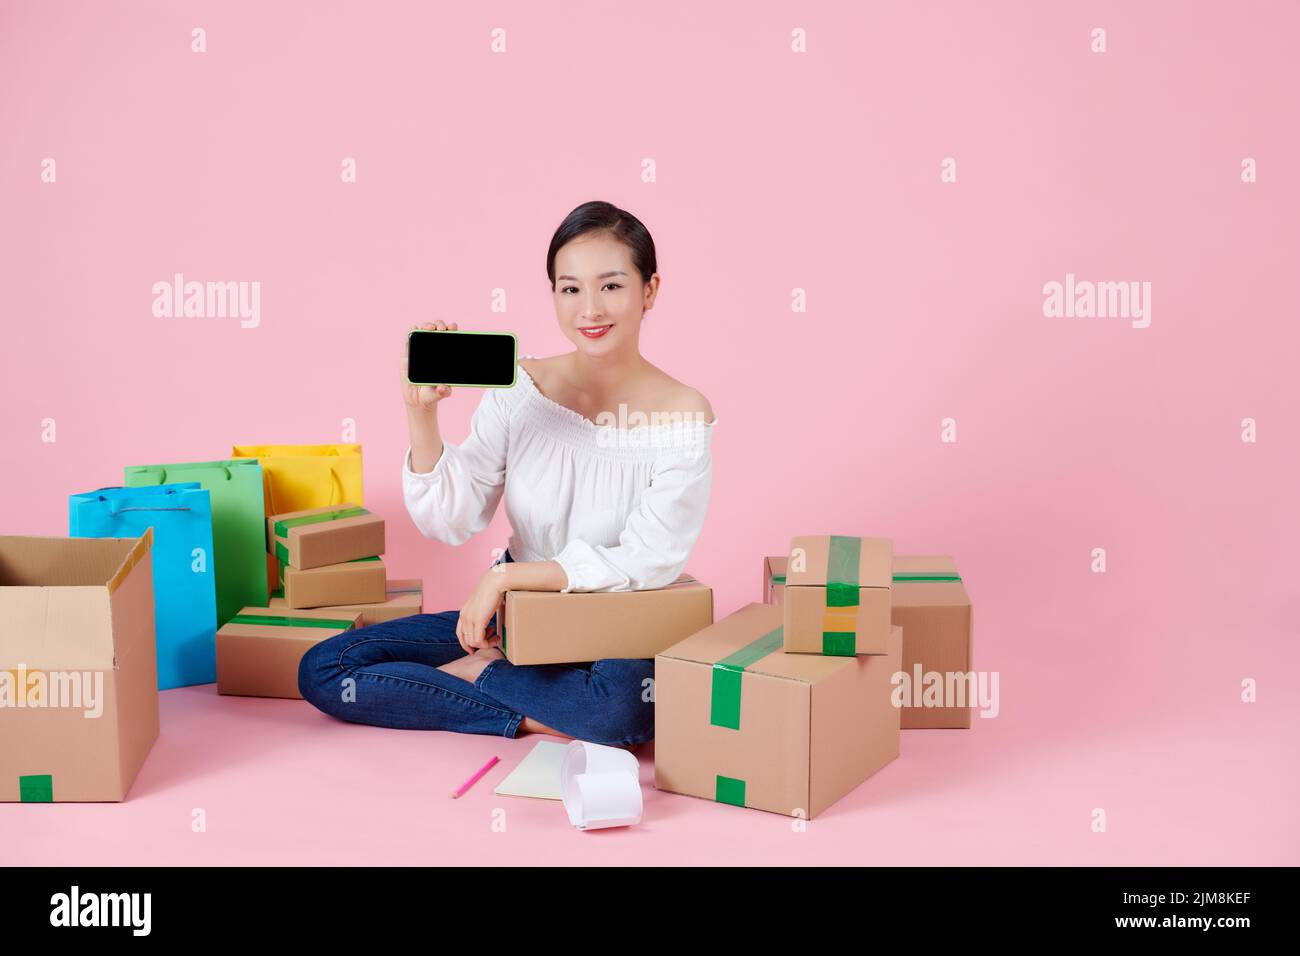 Happy woman showing smartphone with black blank screen, sitting among boxes after moving, advertising real estate agency Stock Photo